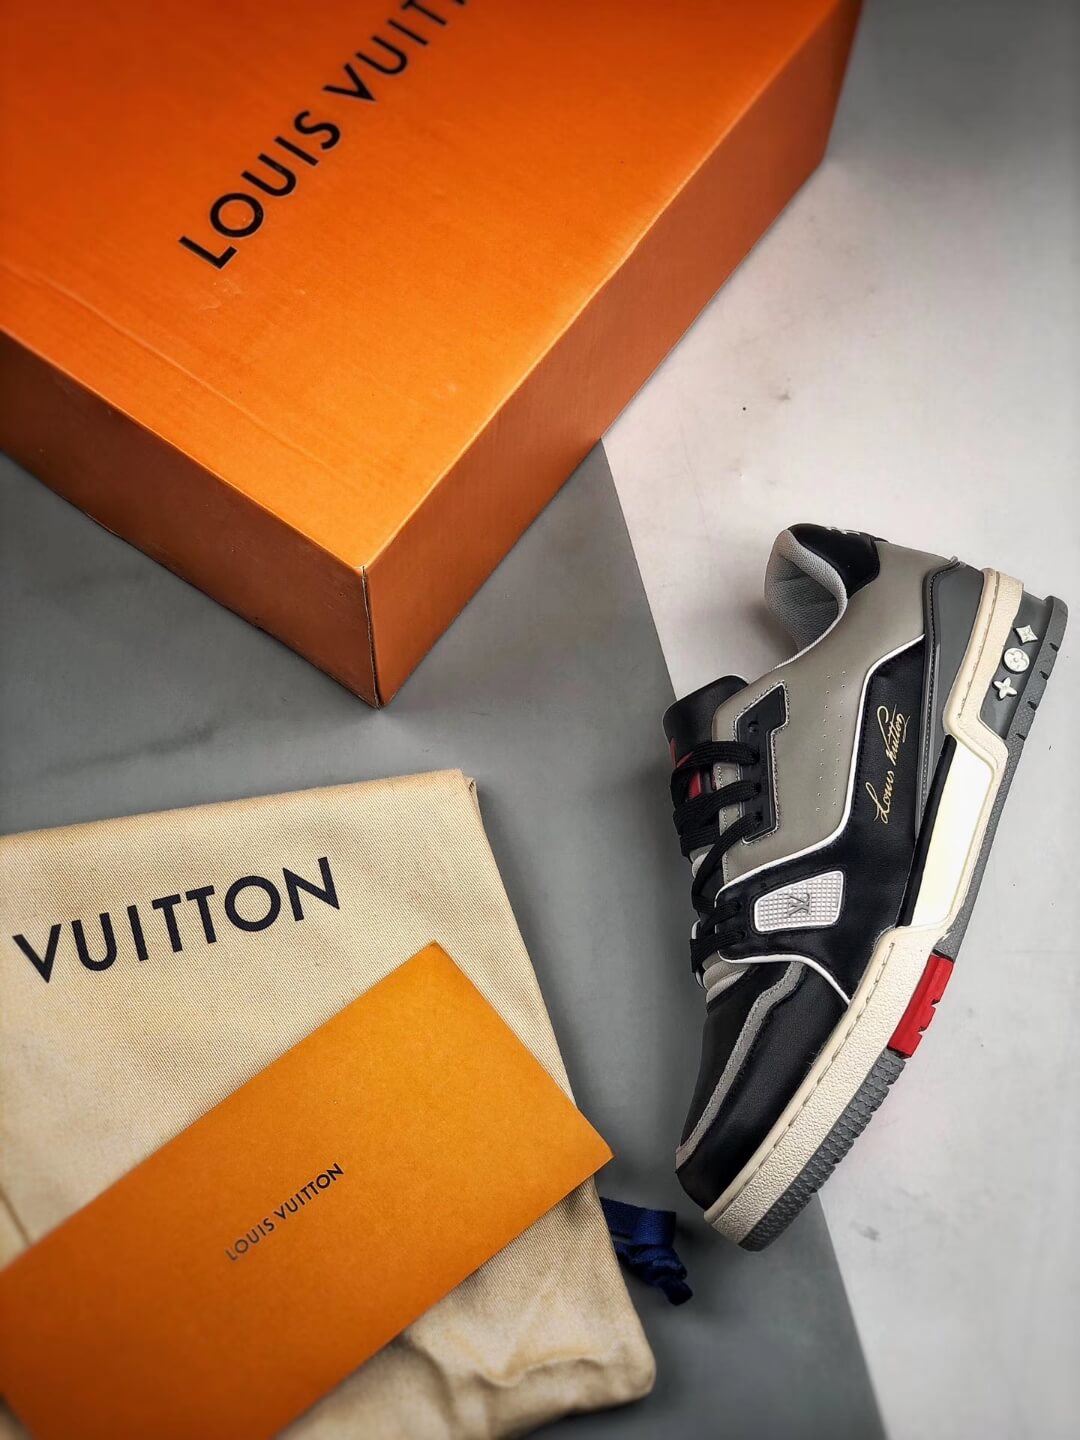 The Virgil Abloh Louis Vuitton LV Trainer Sneaker Boot #54 Black Grey RepSneaker – The Quality ...